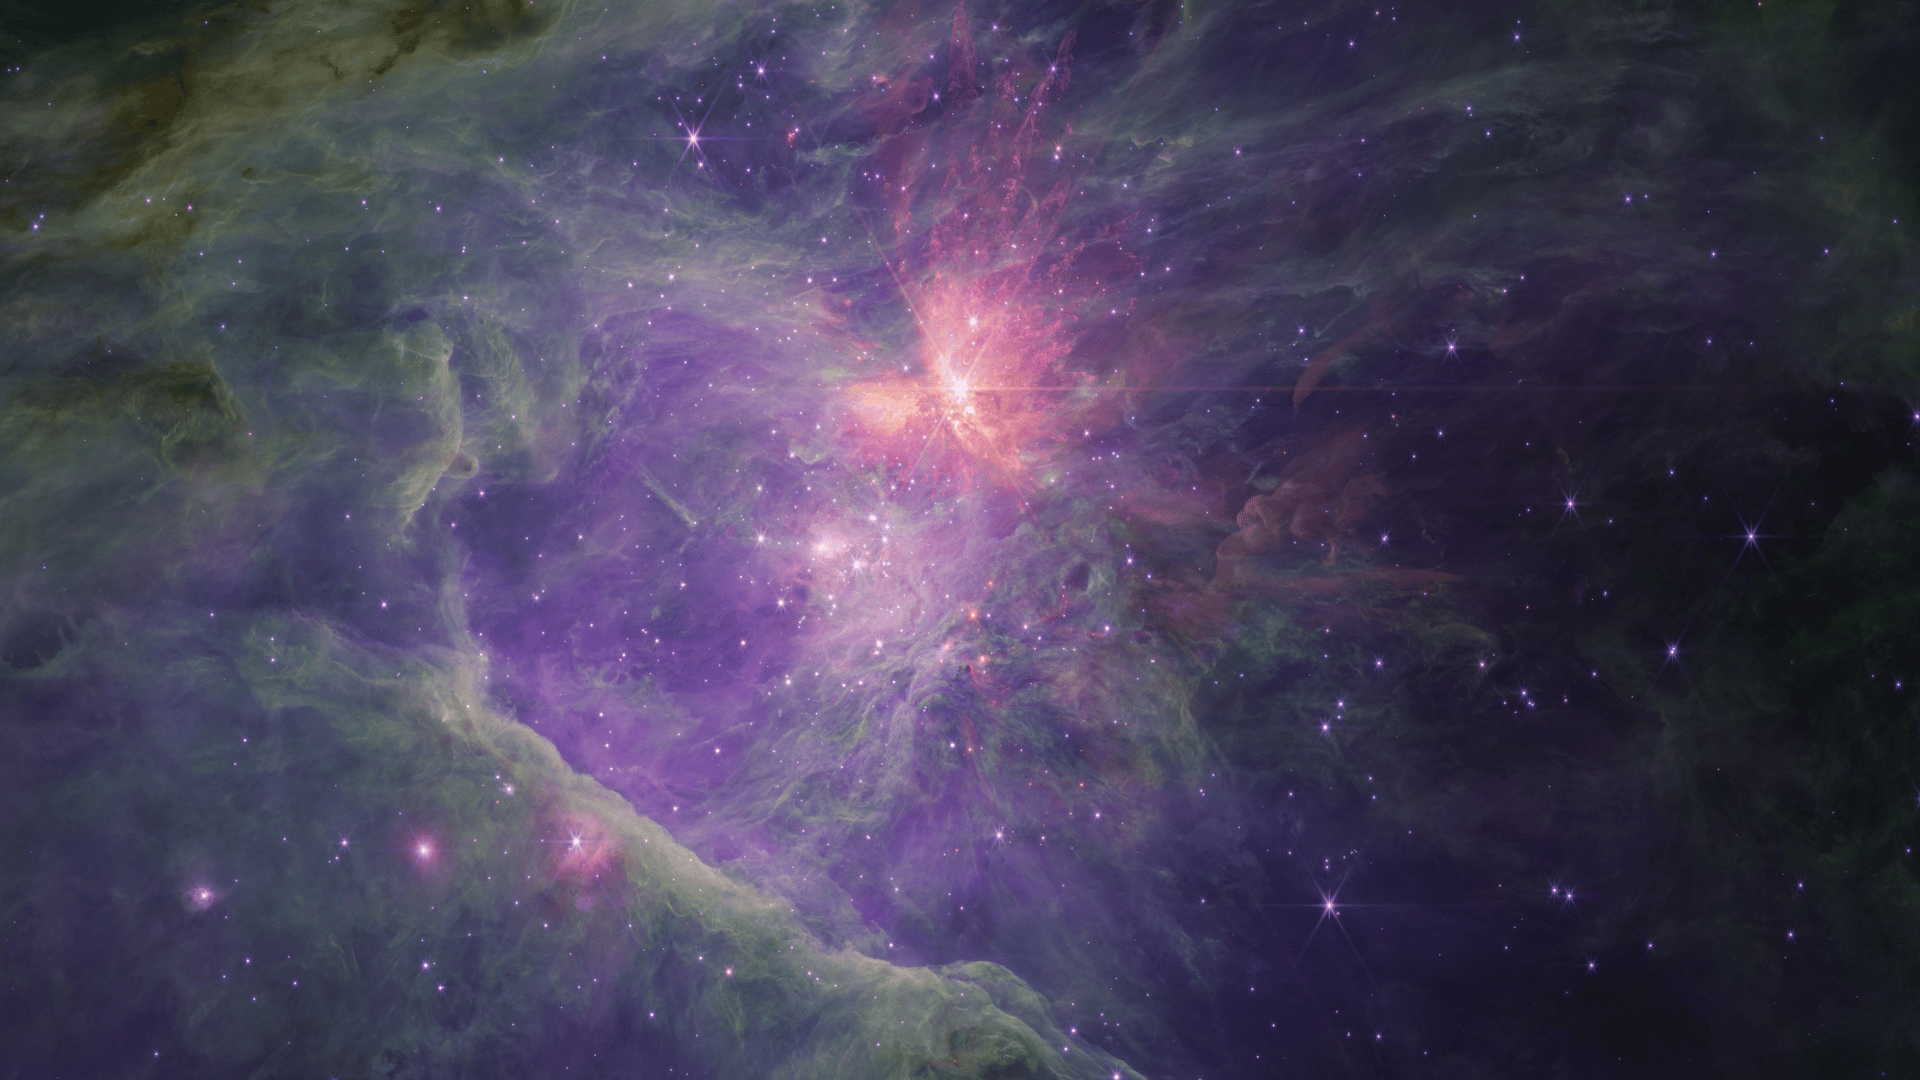 An image of the Orion Nebula as seen through James Webb's Near-Infrared Camera's (NIRCam) long-wavelength channel